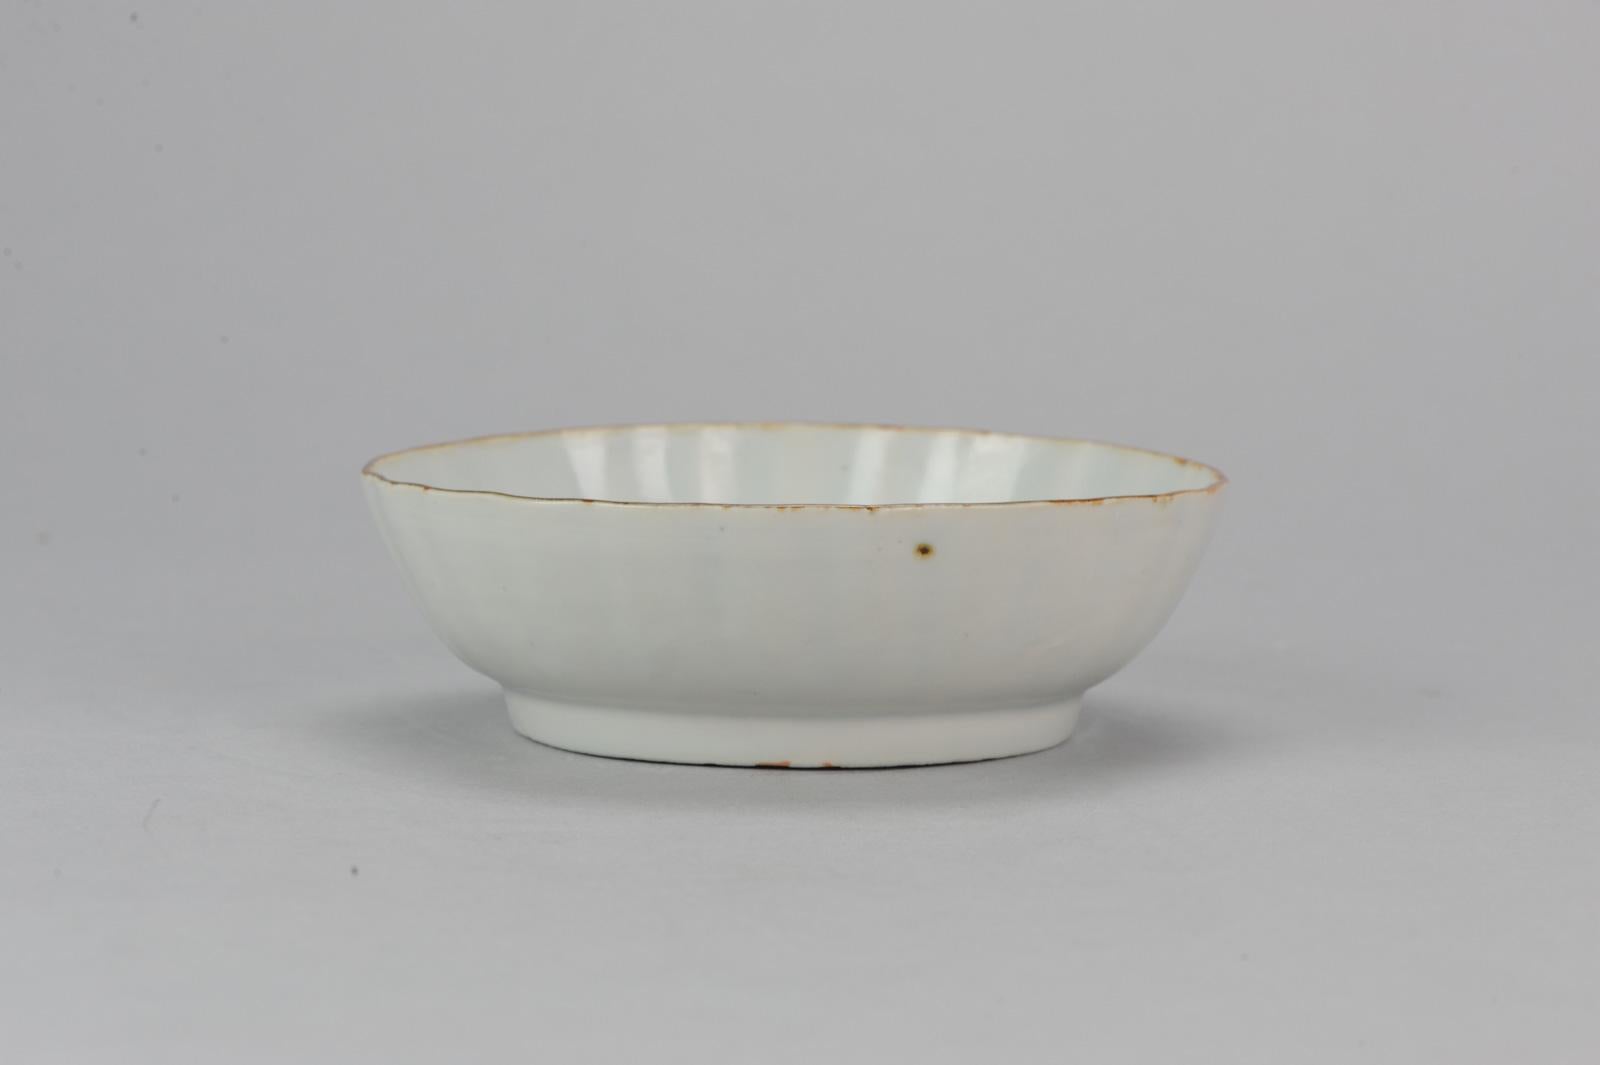 Antique High Quality Japanese Porcelain Bowl Arita Edo Japan, 18/19th Century In Good Condition For Sale In Amsterdam, Noord Holland